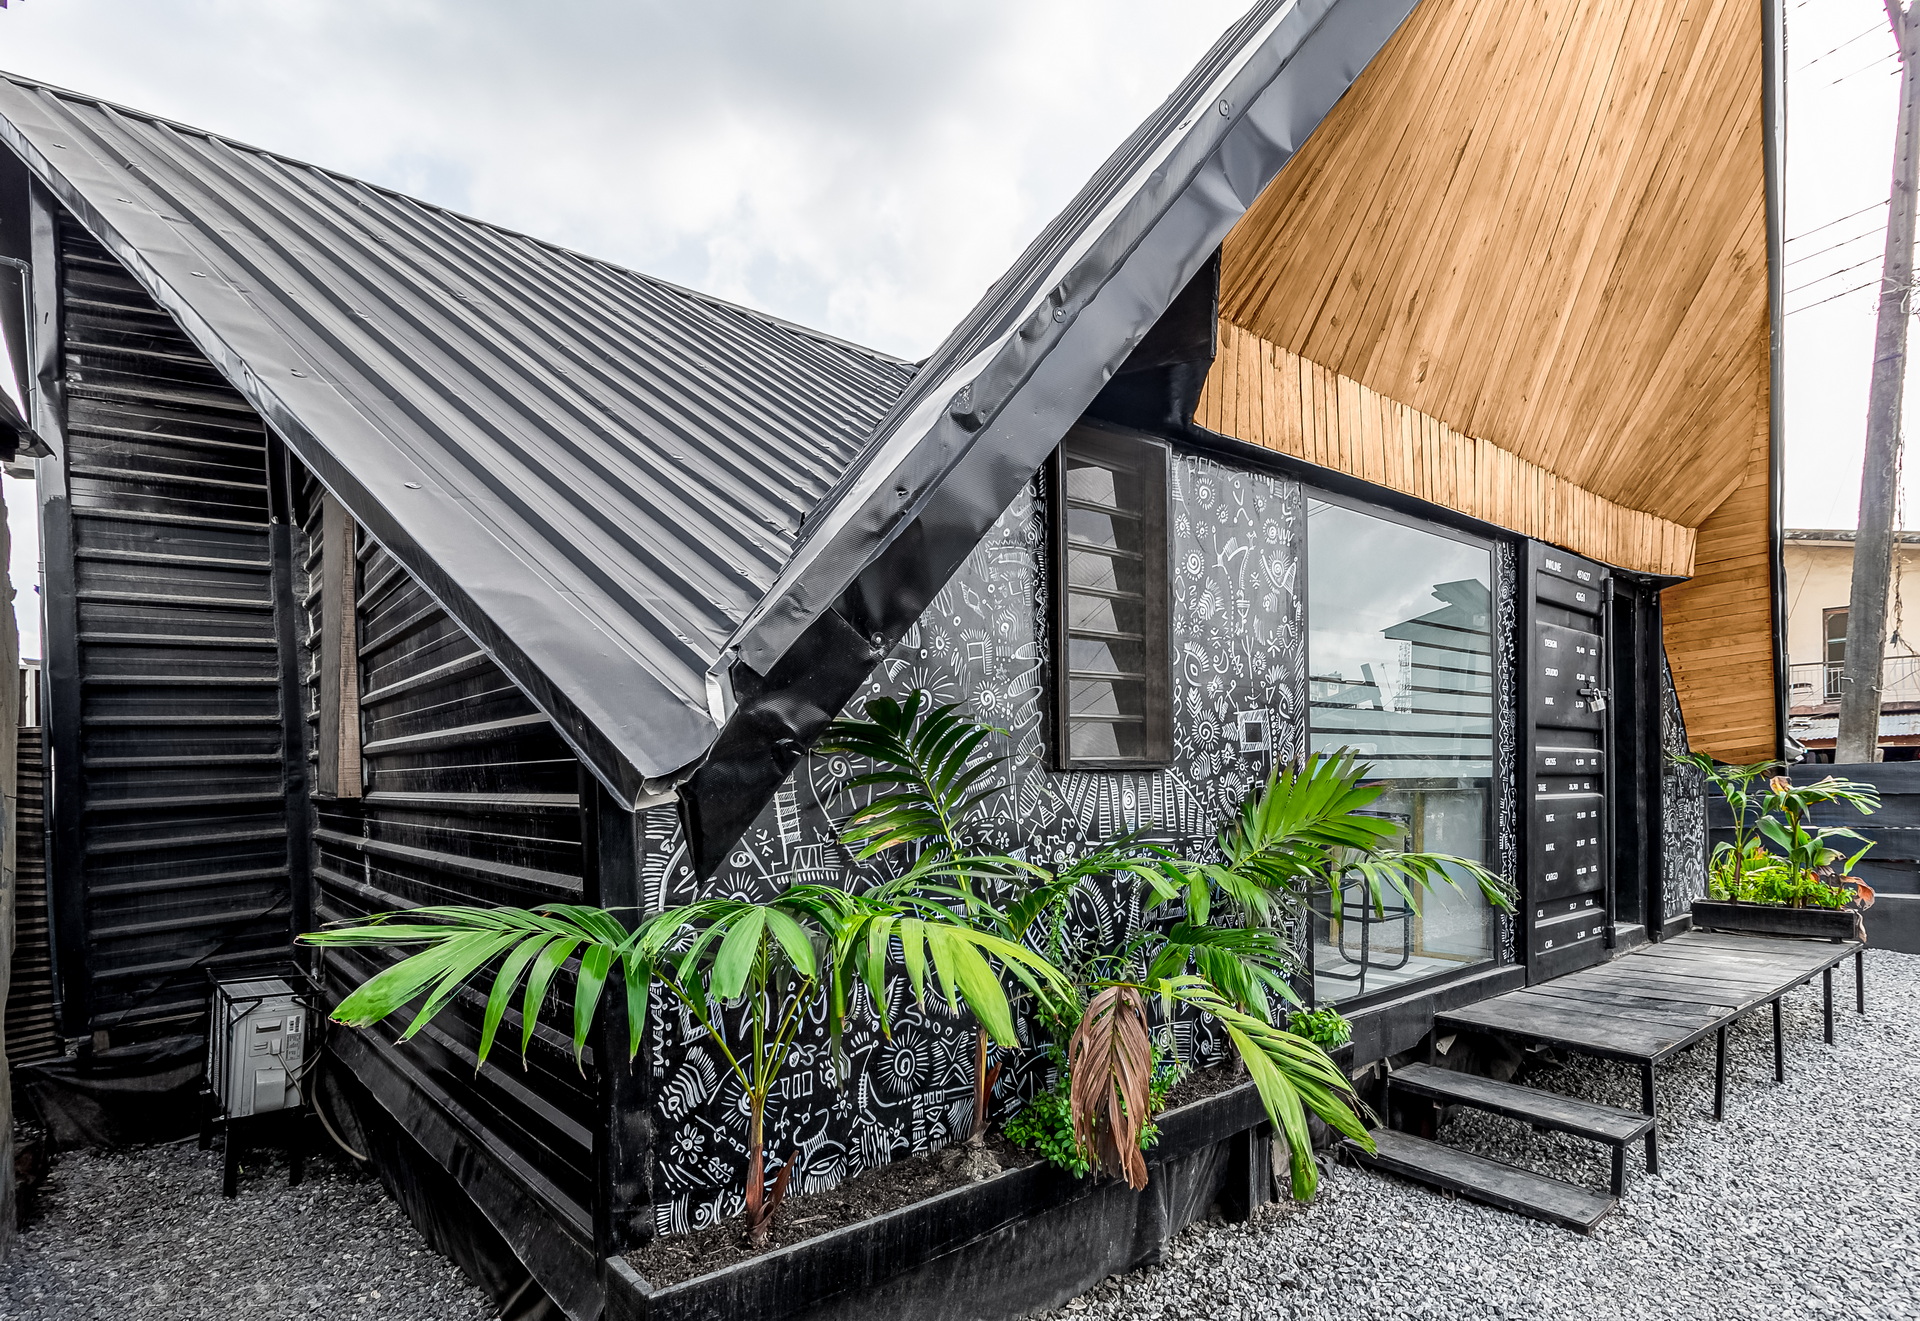 <p>The principally timber structure on concrete foundations is made from local ekki wood, and the design of the roof is drawn from the Japanese art of origami.&nbsp;</p>